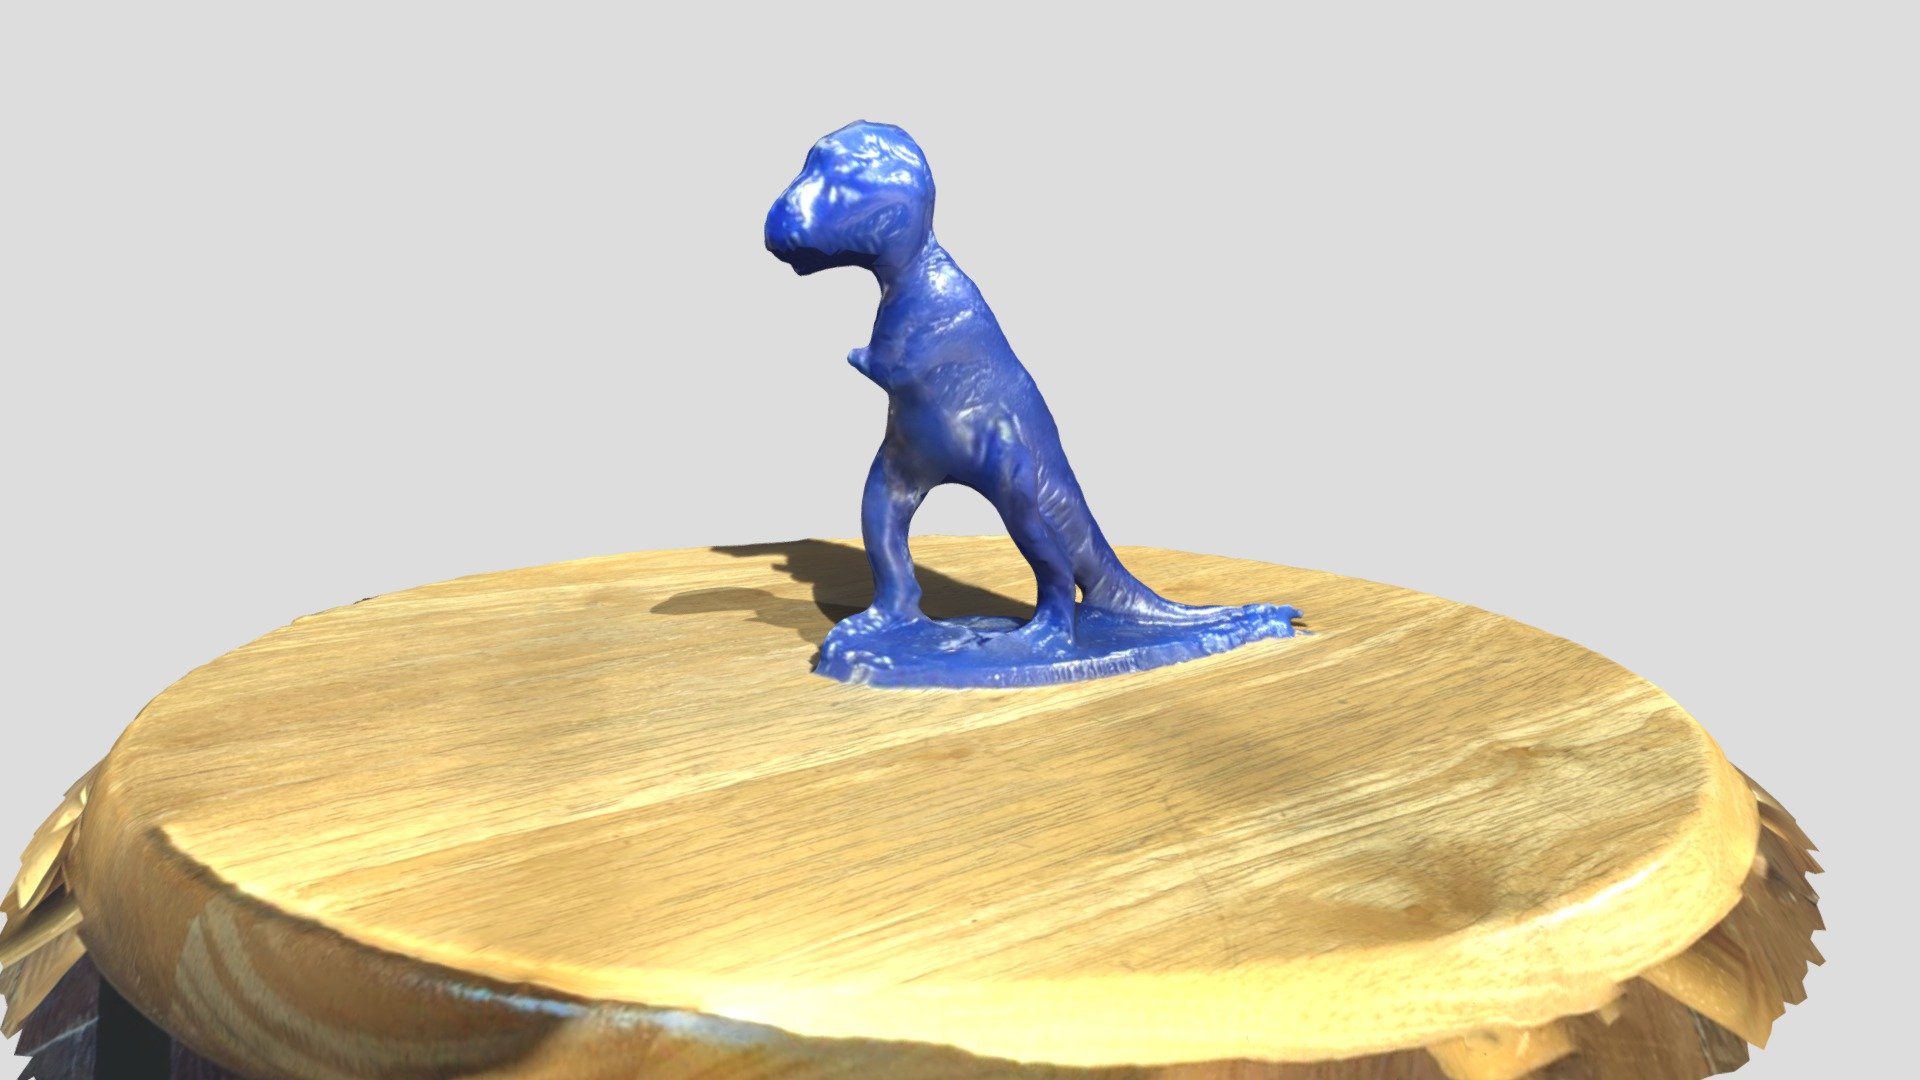 This figurine was captured with an iPad Pro 2 and the TRNIO app on January 17, 2021 3d model